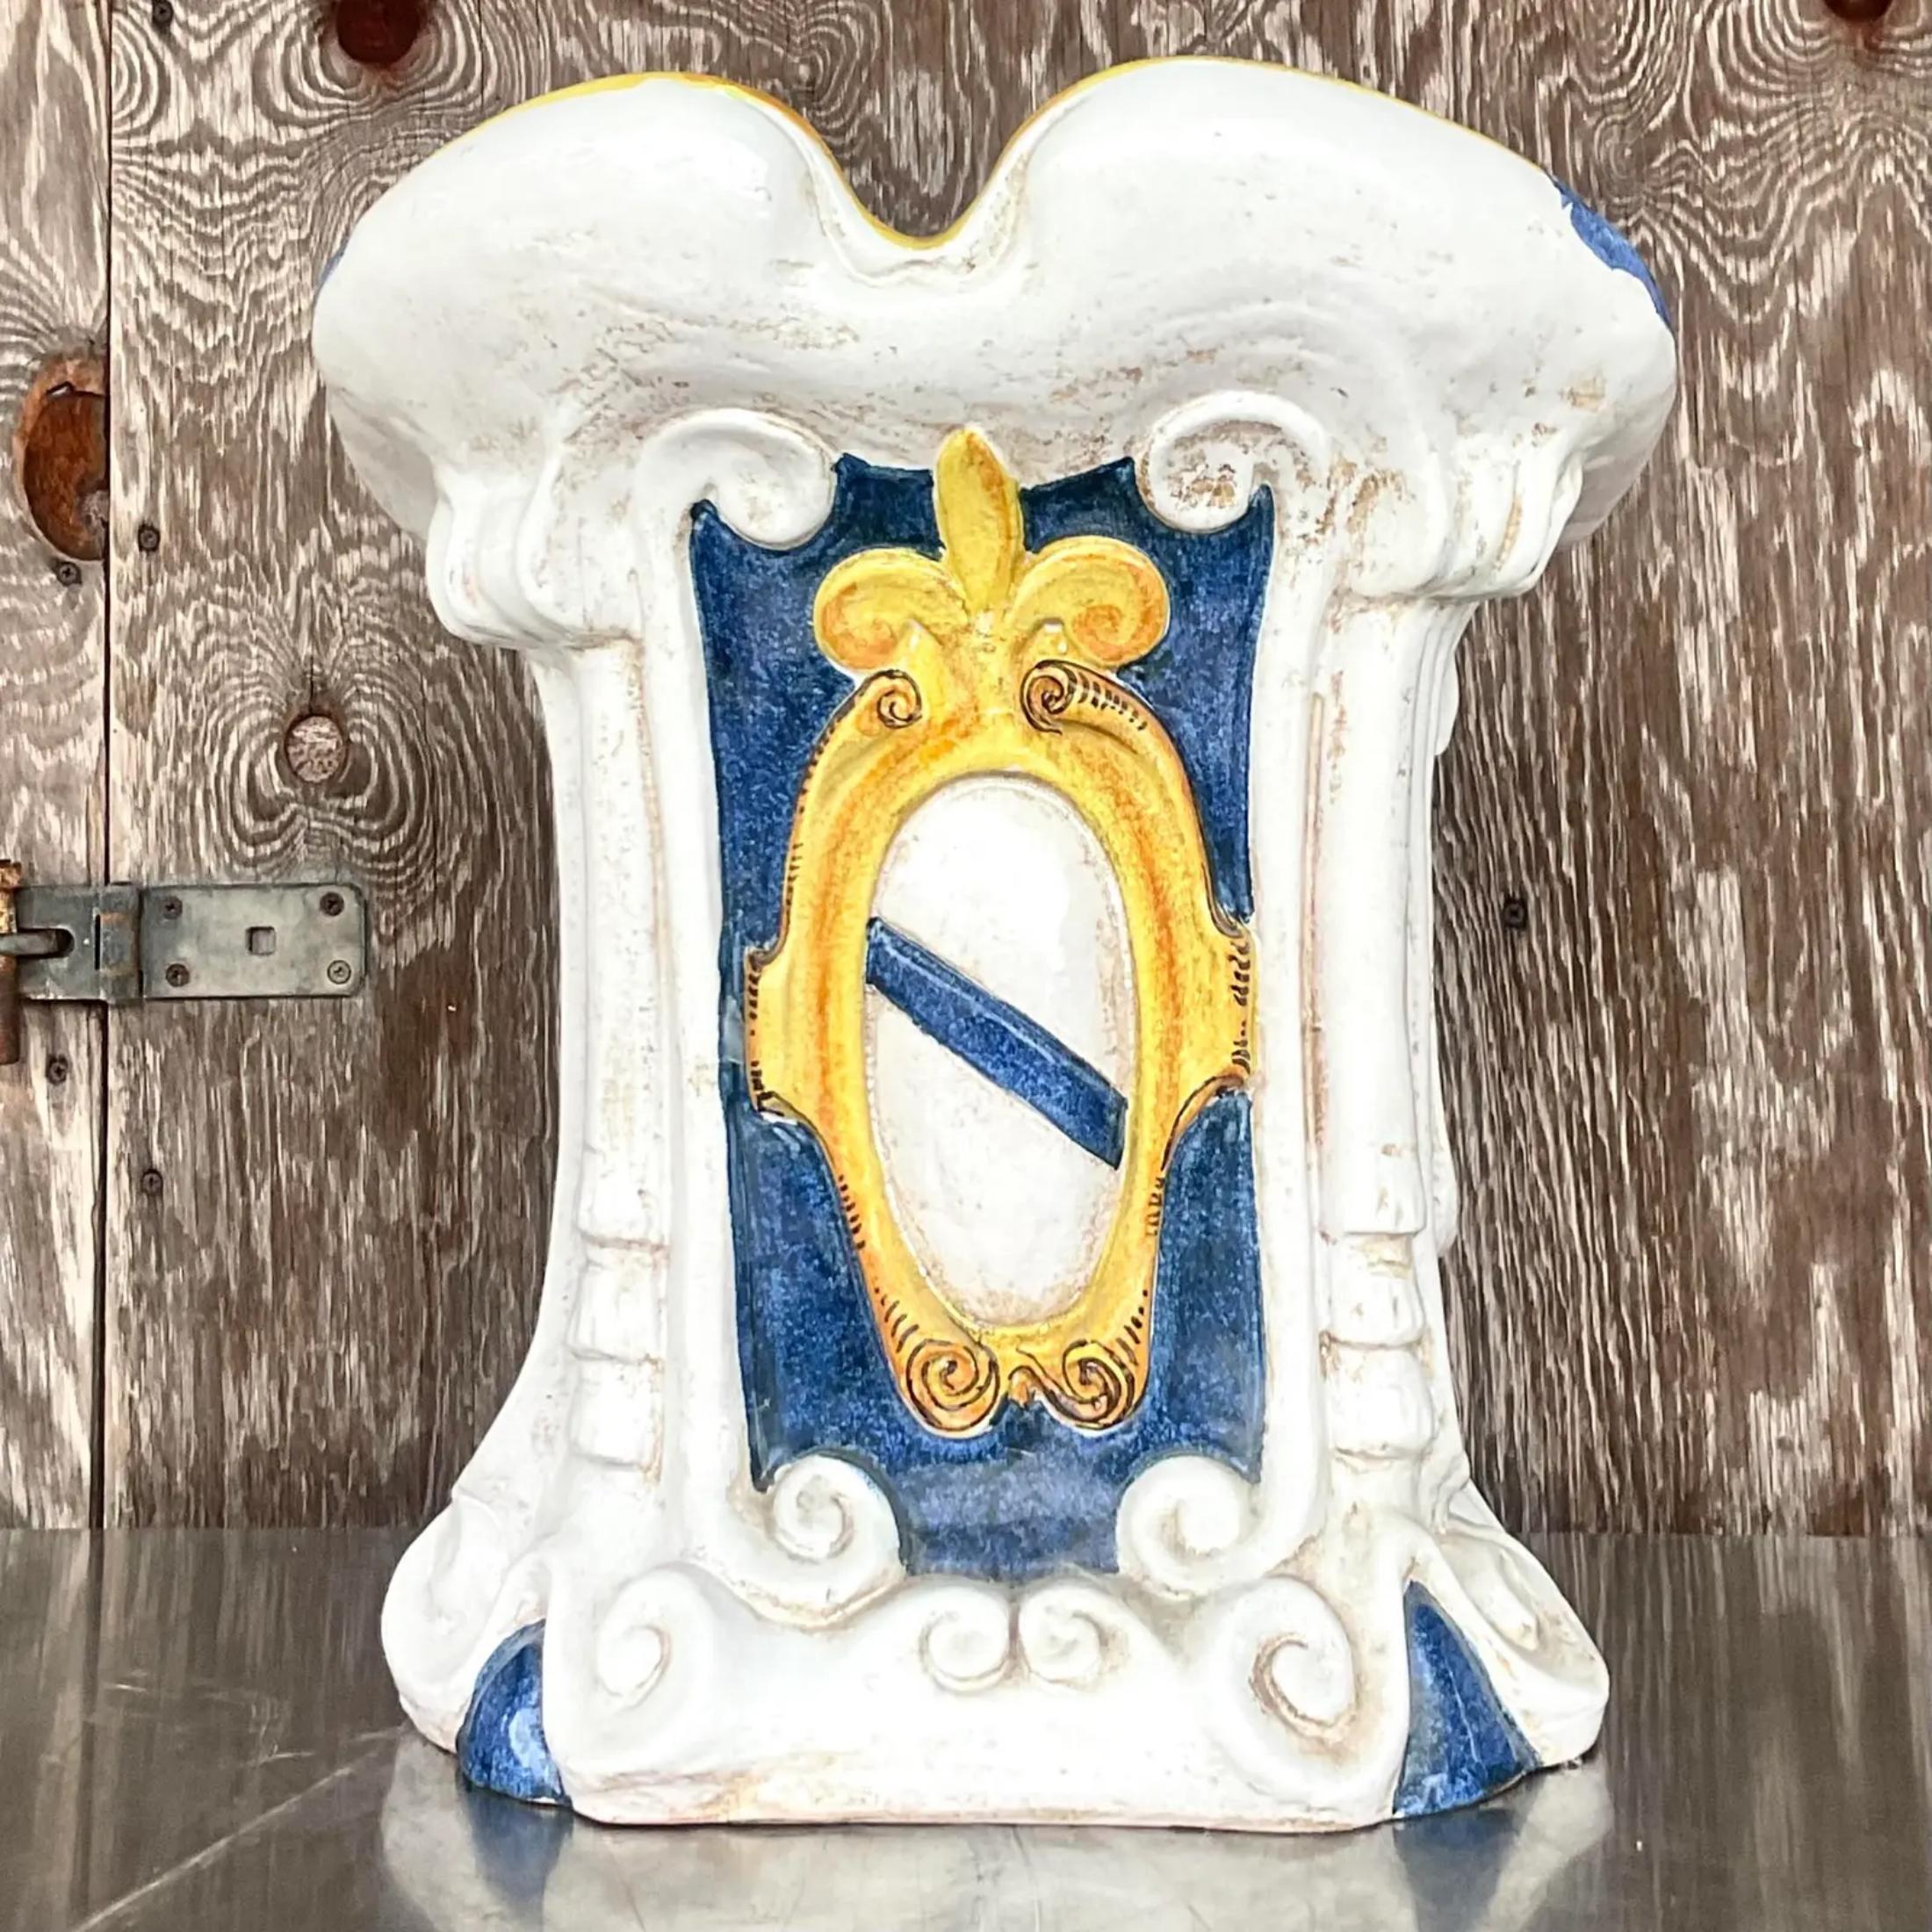 A fabulous vintage Coastal Italian garden stool. Beautiful hand painted design with a glazed ceramic finish. Brilliant colors make this piece a real standout. Perfect indoors or outside. Acquired from a Palm Beach estate. 